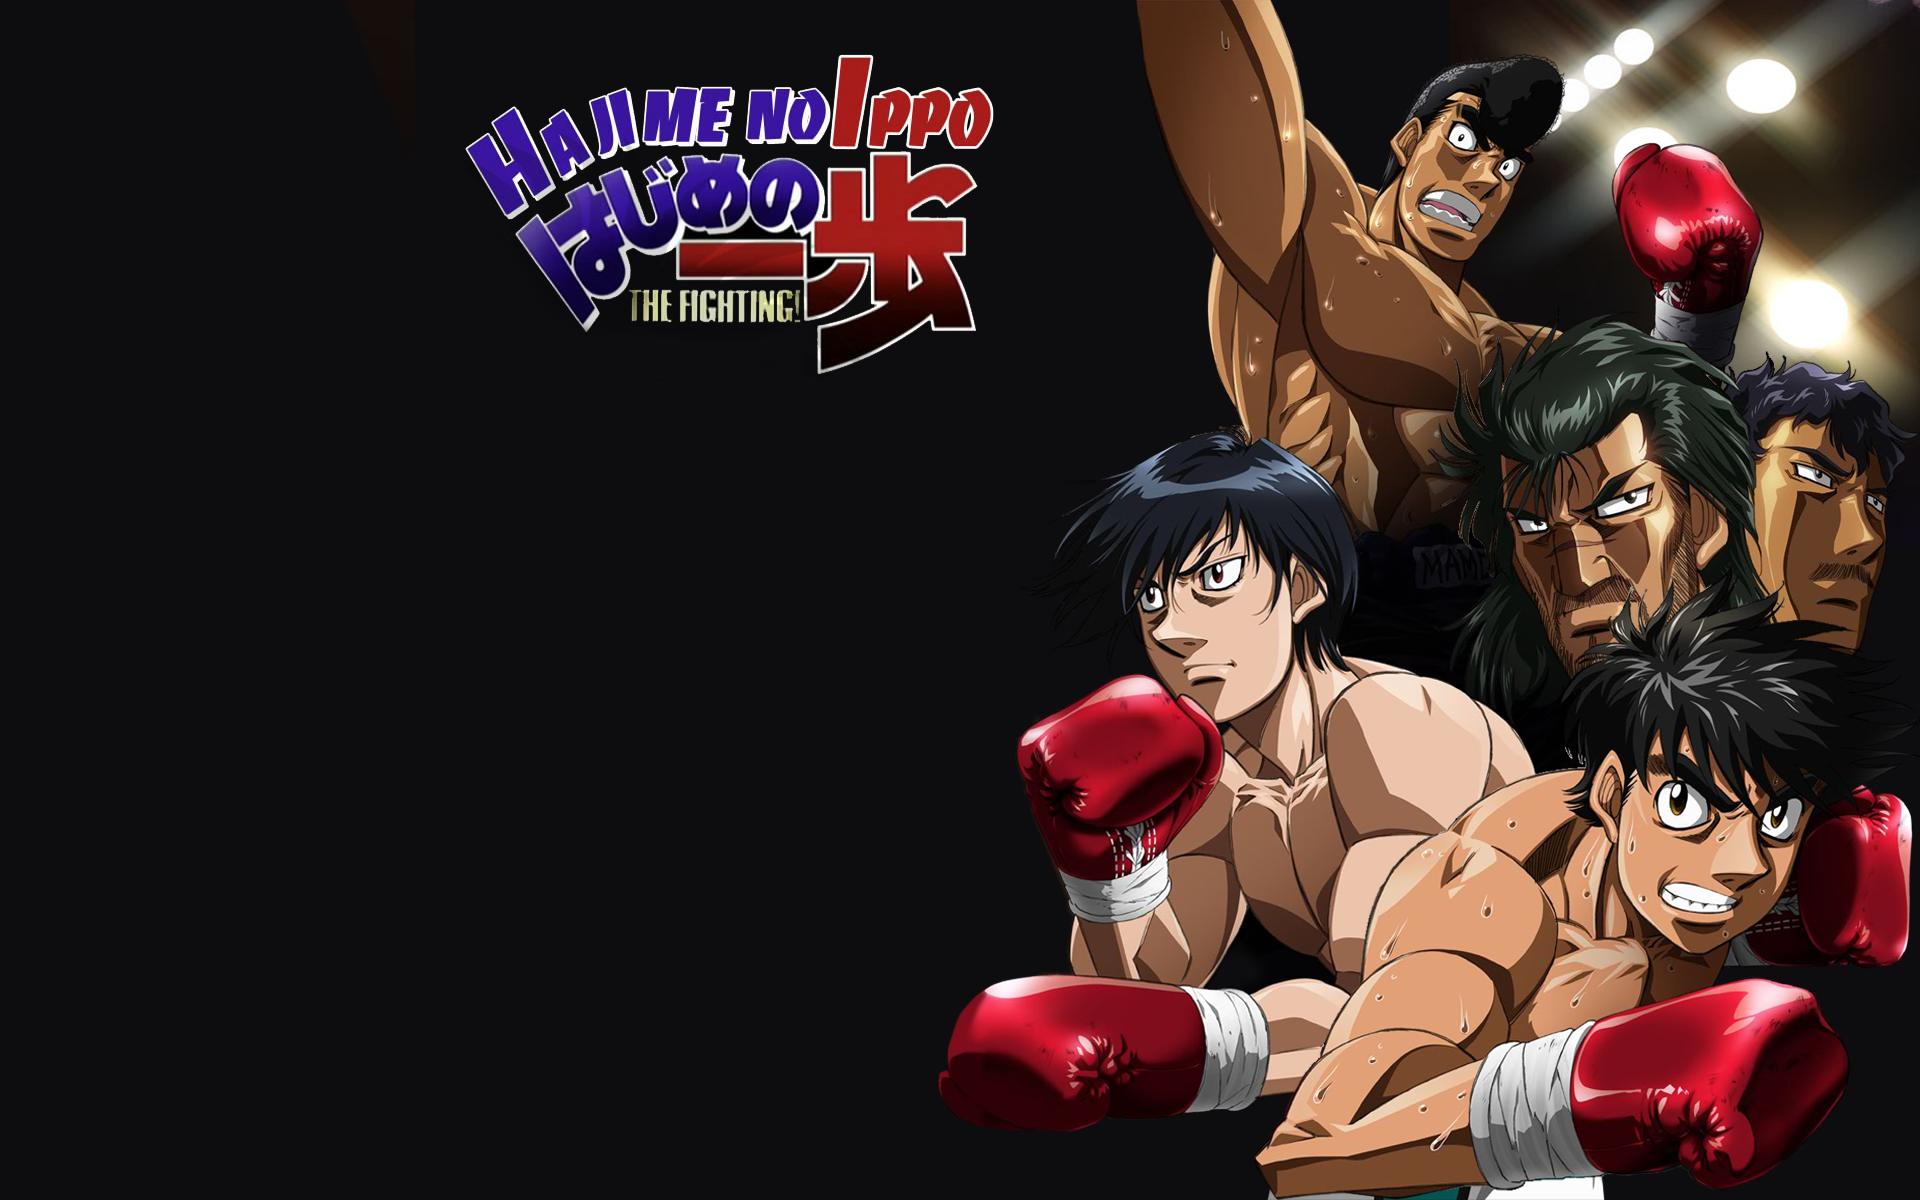 Ippo wallpaper by MarcoDiaz037 - Download on ZEDGE™